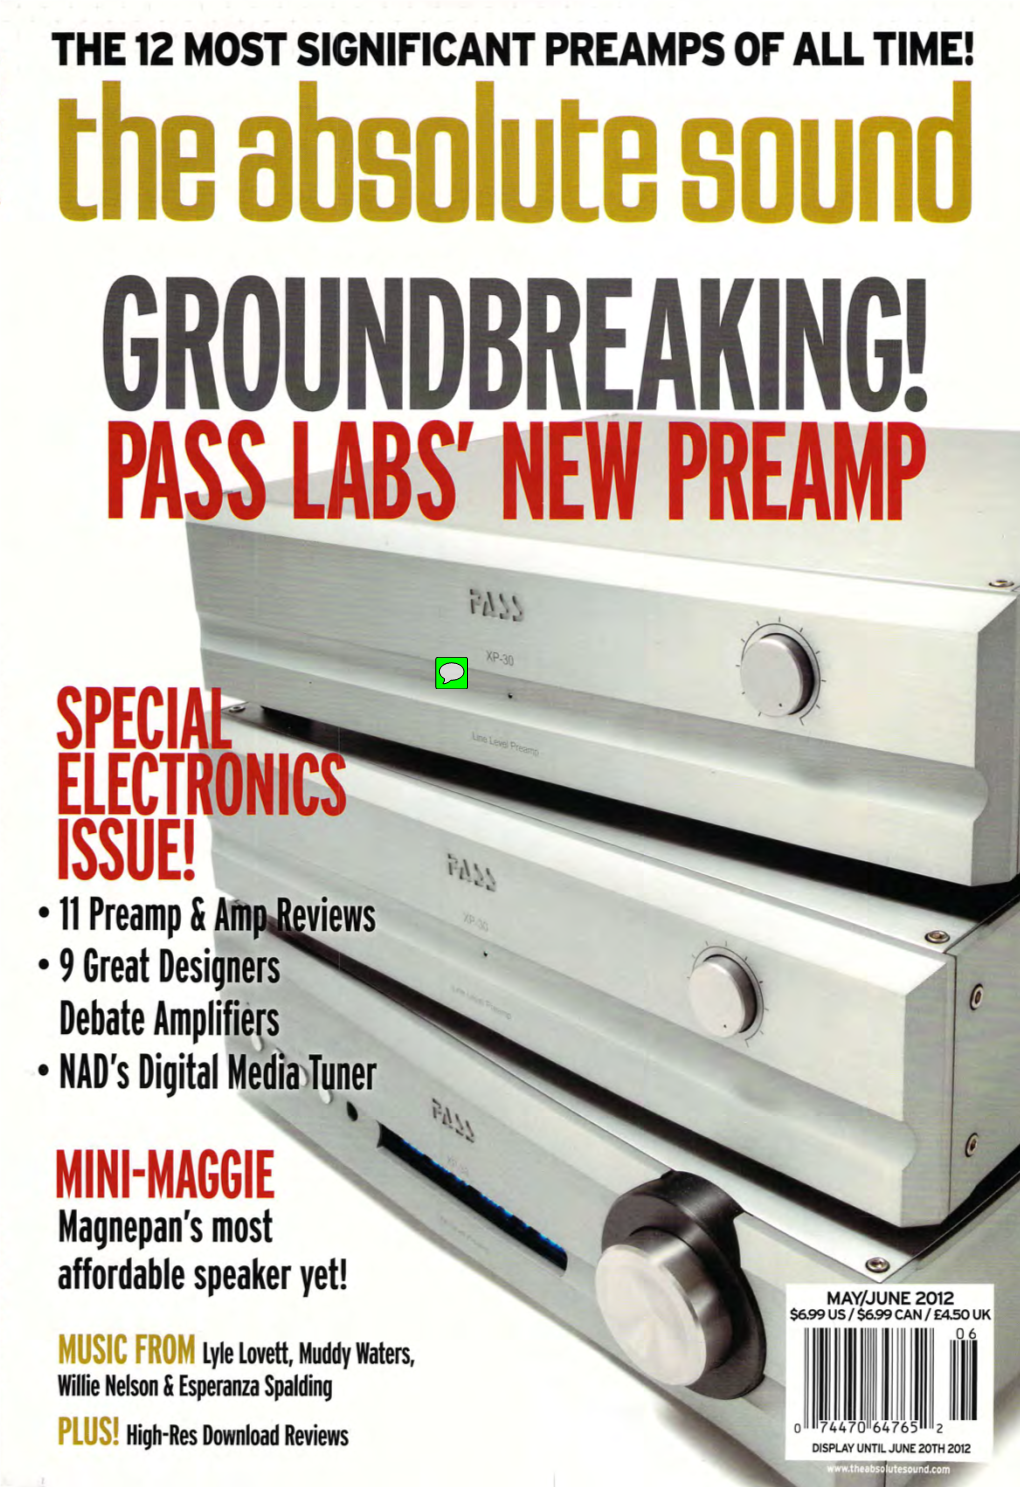 Pass Labs' New Preamp